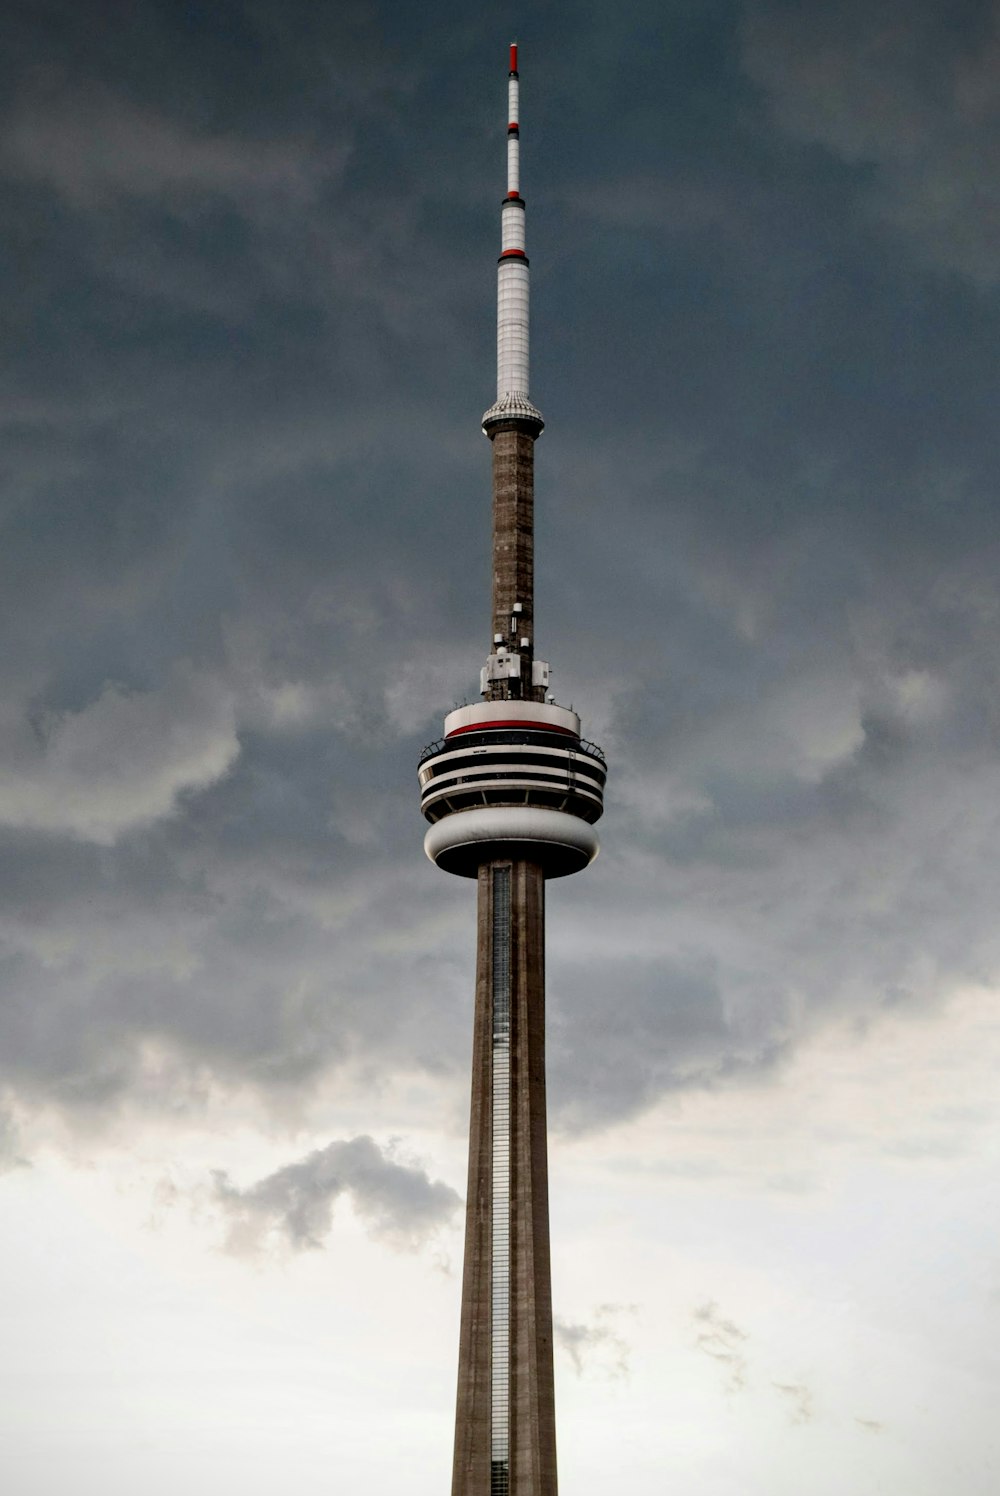 brown and white metal tower under cloudy sky